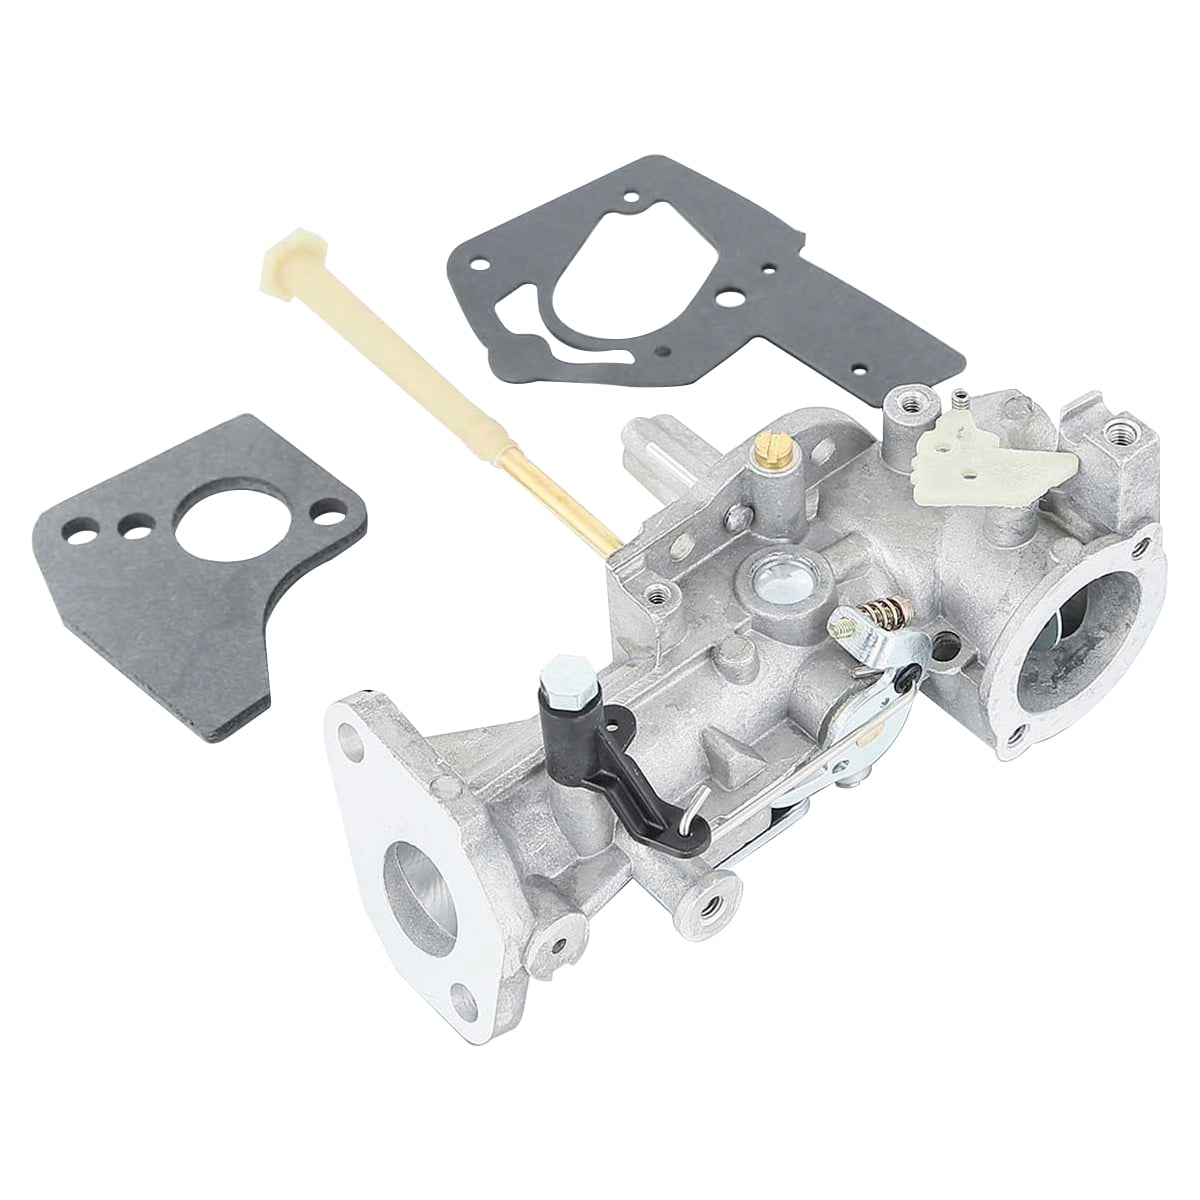 Lawn Mower Carburetor Fits For Briggs & Stratton 498298 692784 495951 495426  492611 490533 With Free Gaskets 